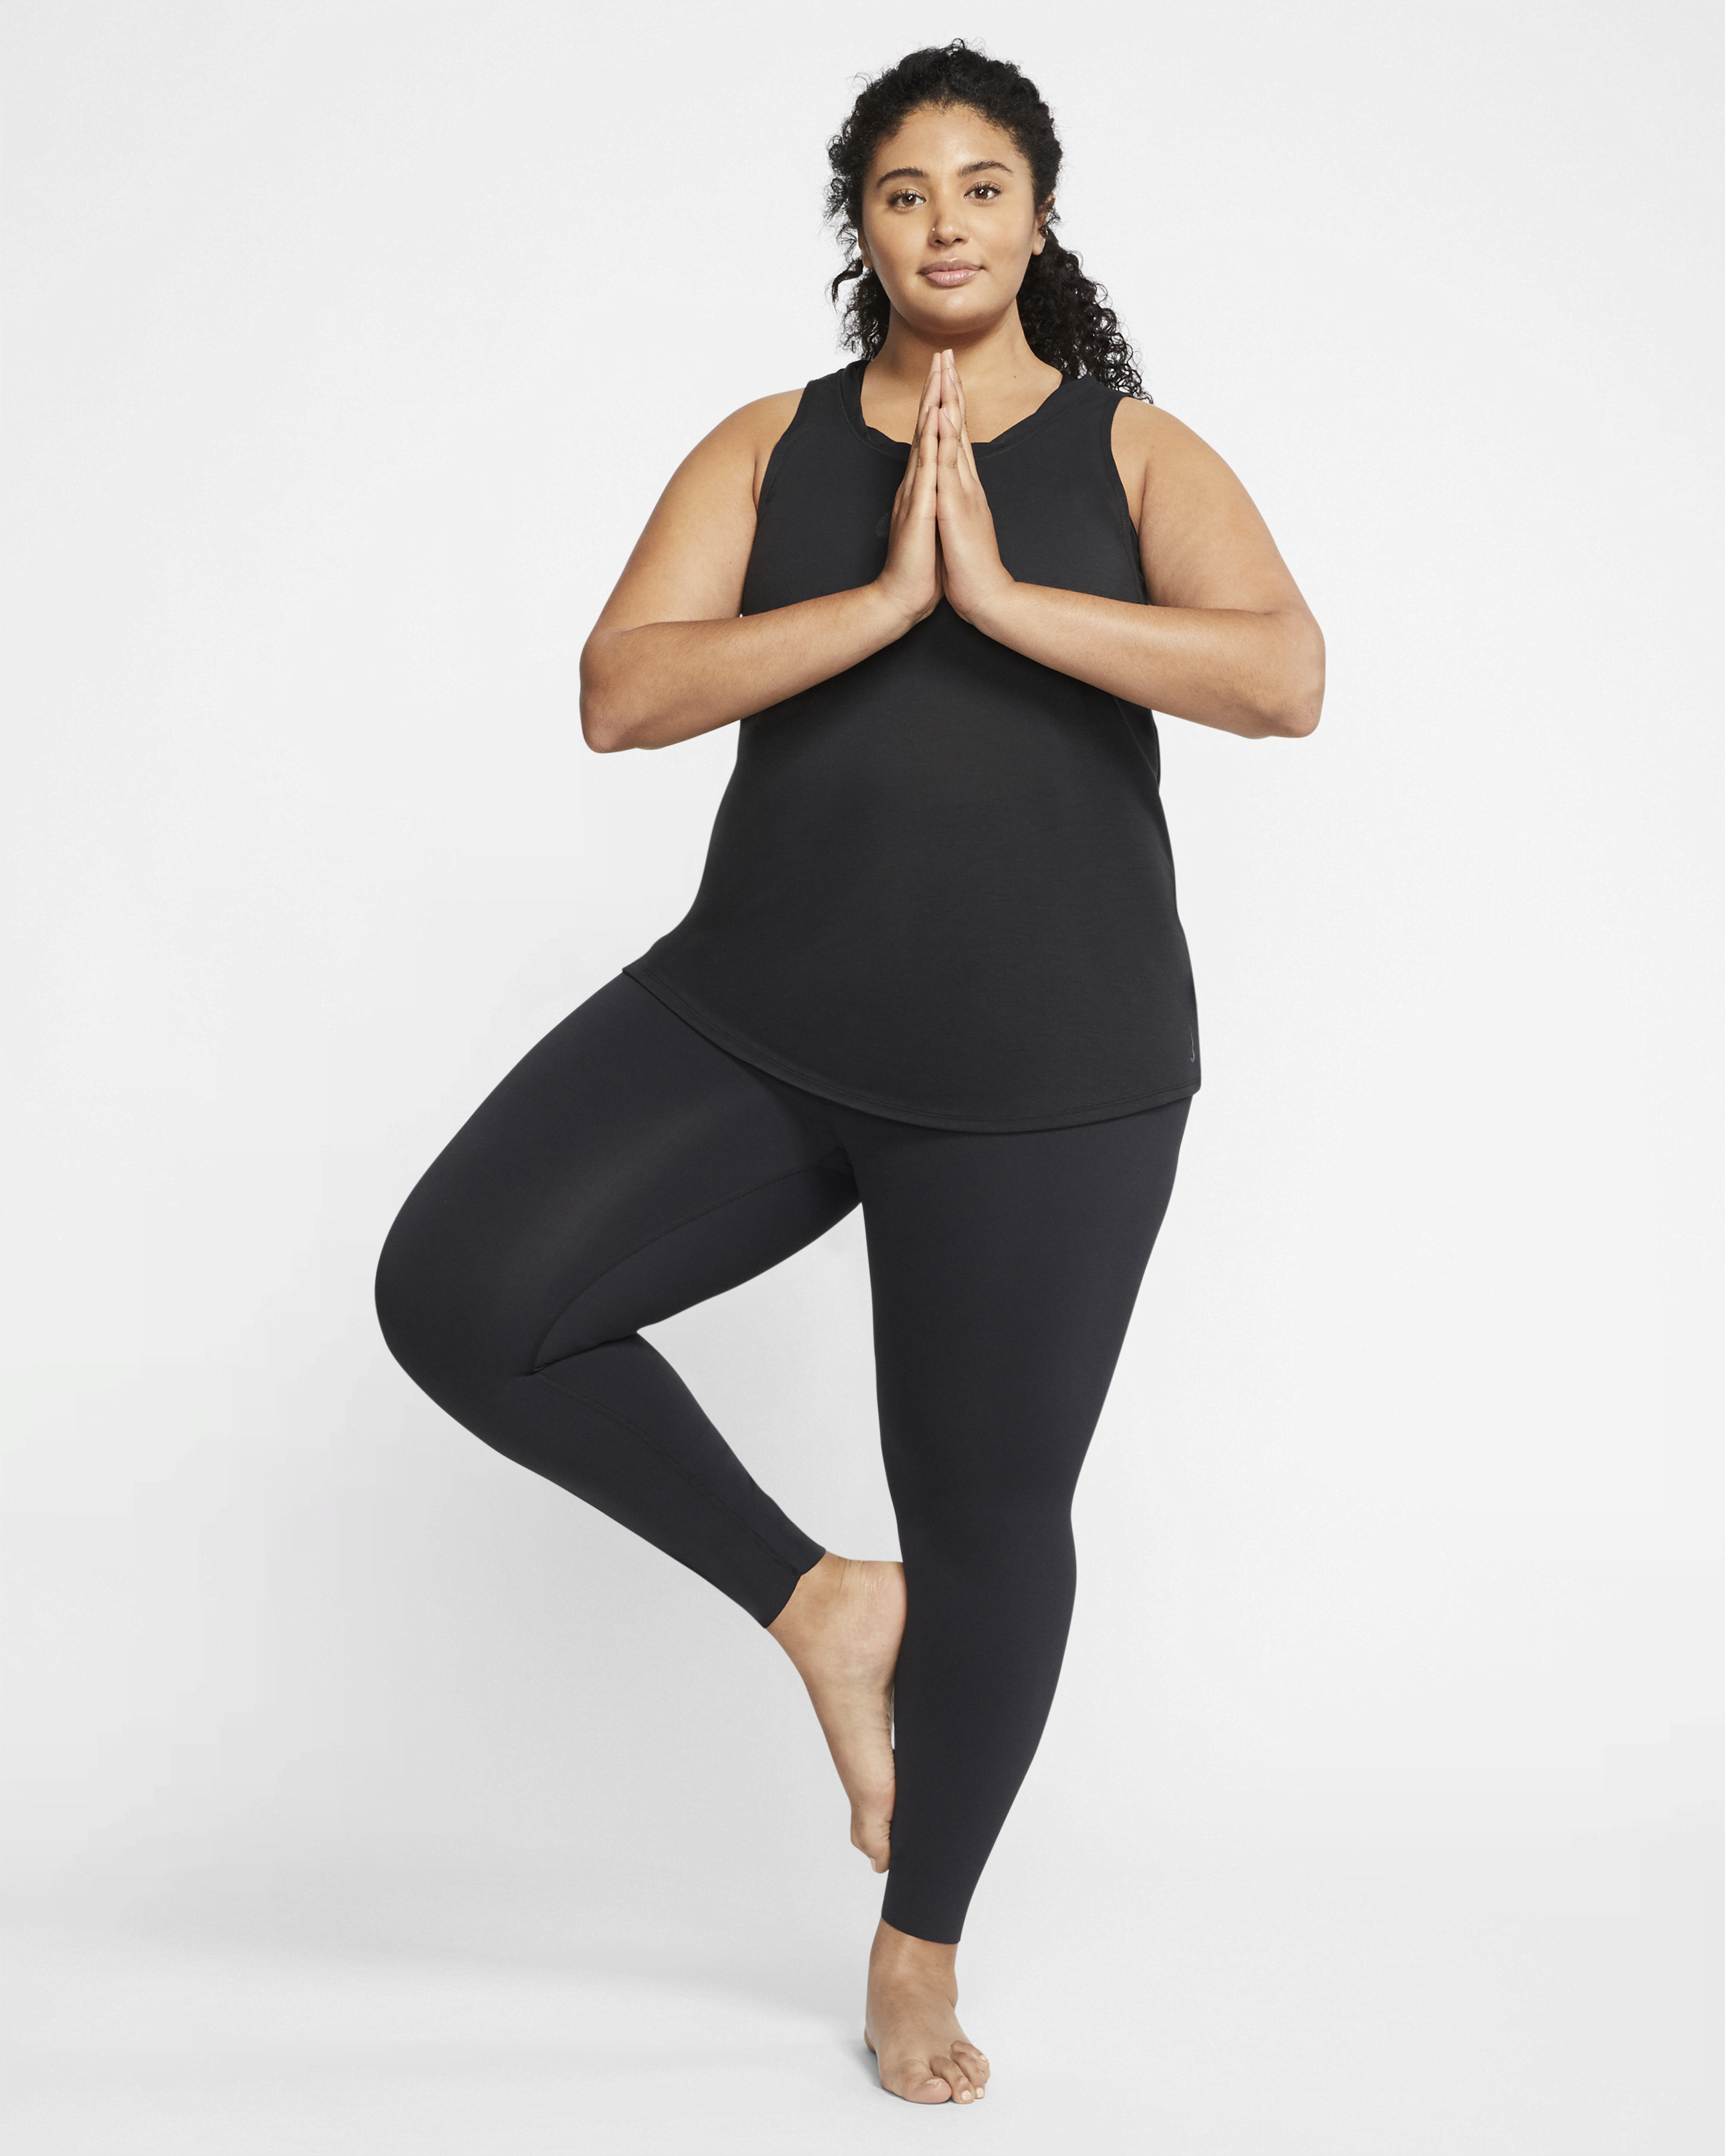 From Around the Web: 20 Awesome Photos of plus size yoga pants